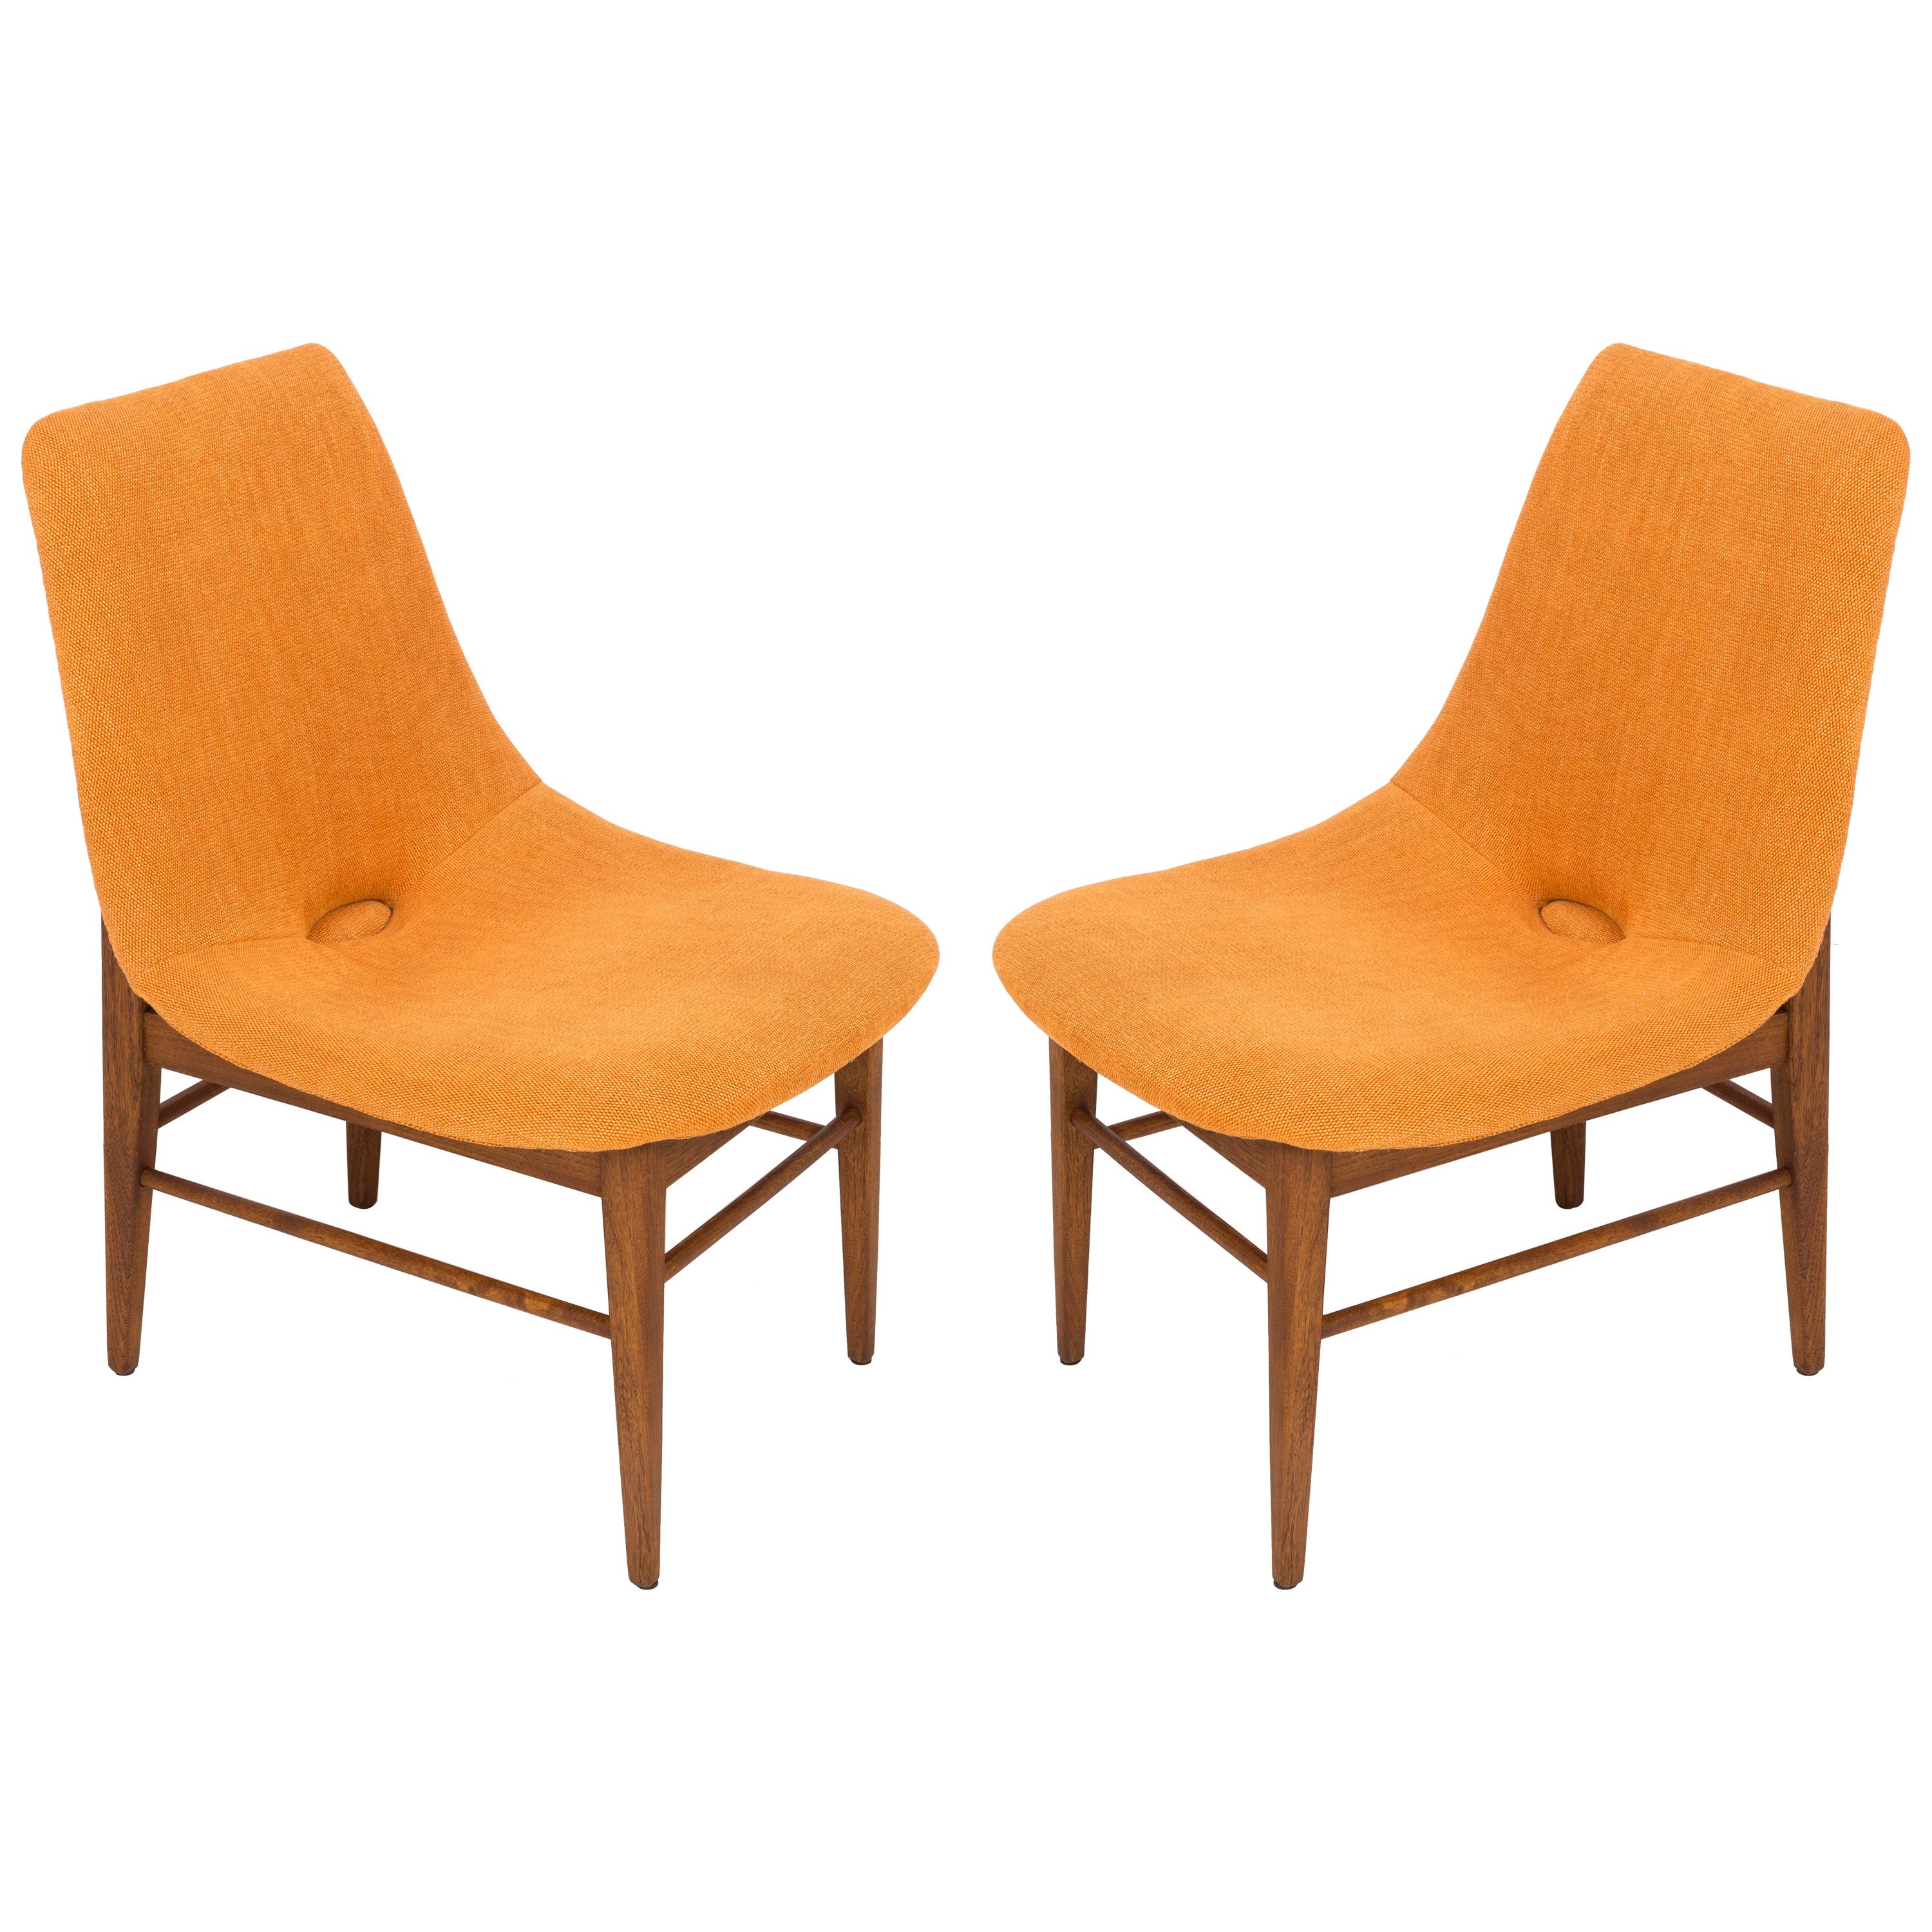 Set of Two Rare 20th Century Orange Shell Chairs, H. Lachert, 1960s For Sale